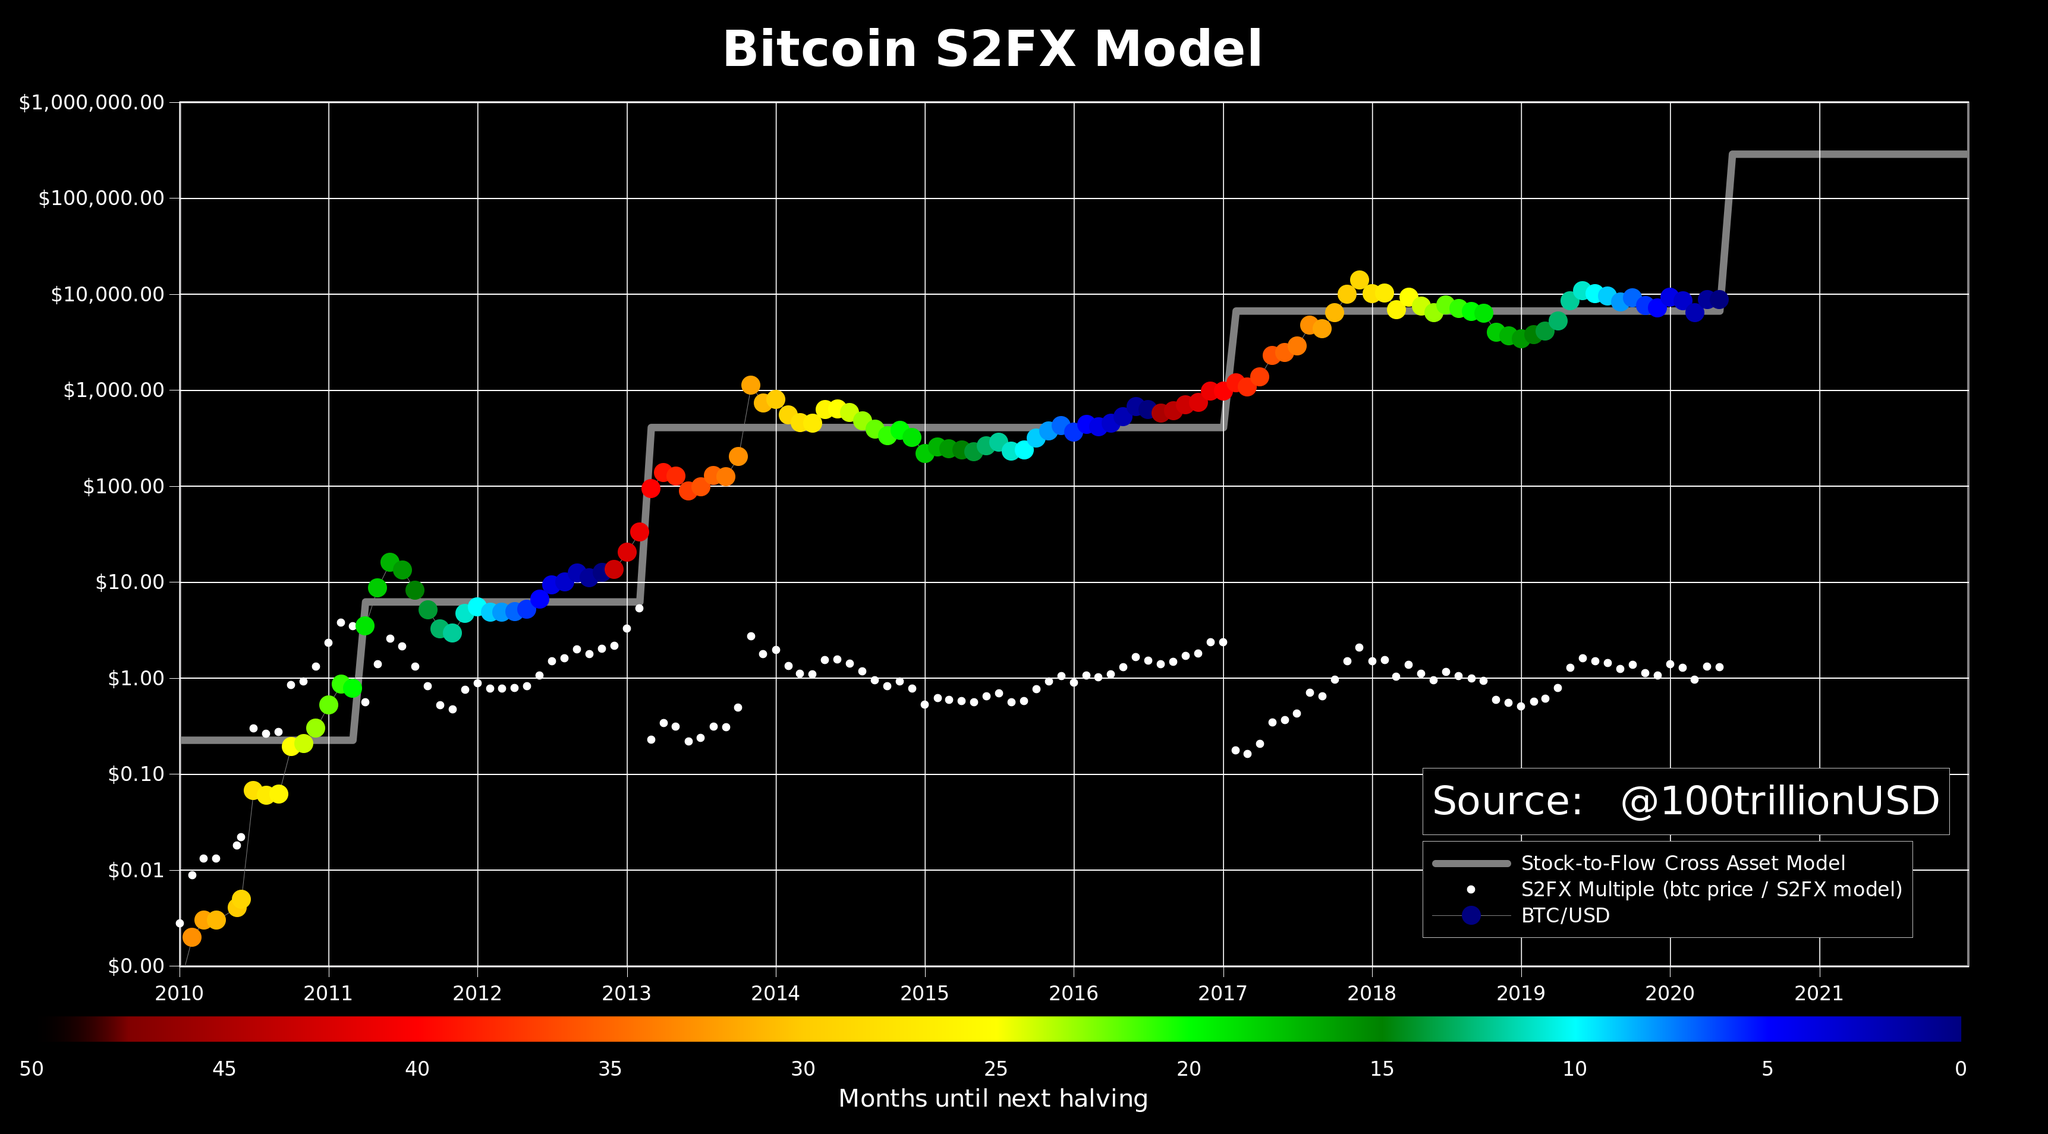 Planb On Twitter Chart With Bitcoin S2fx Model Prices Note S2fx Is Not A Time Series Model Like S2f But A Cross Asset Model I Just Converted The 4 S2f Marketvalue Clusters Into